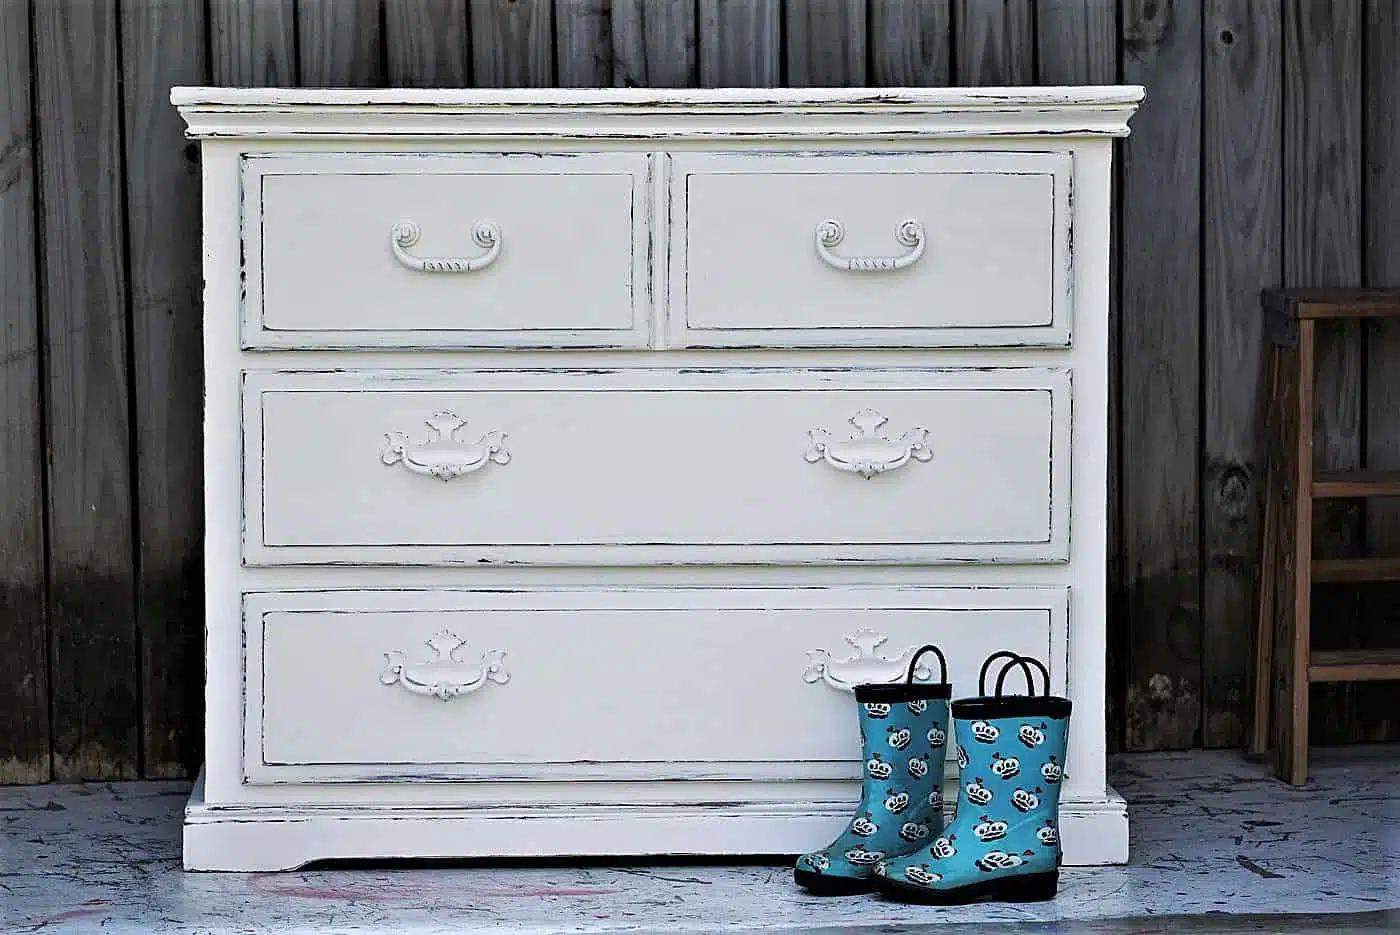 How To Make White Furniture Look Distressed And Naturally Worn